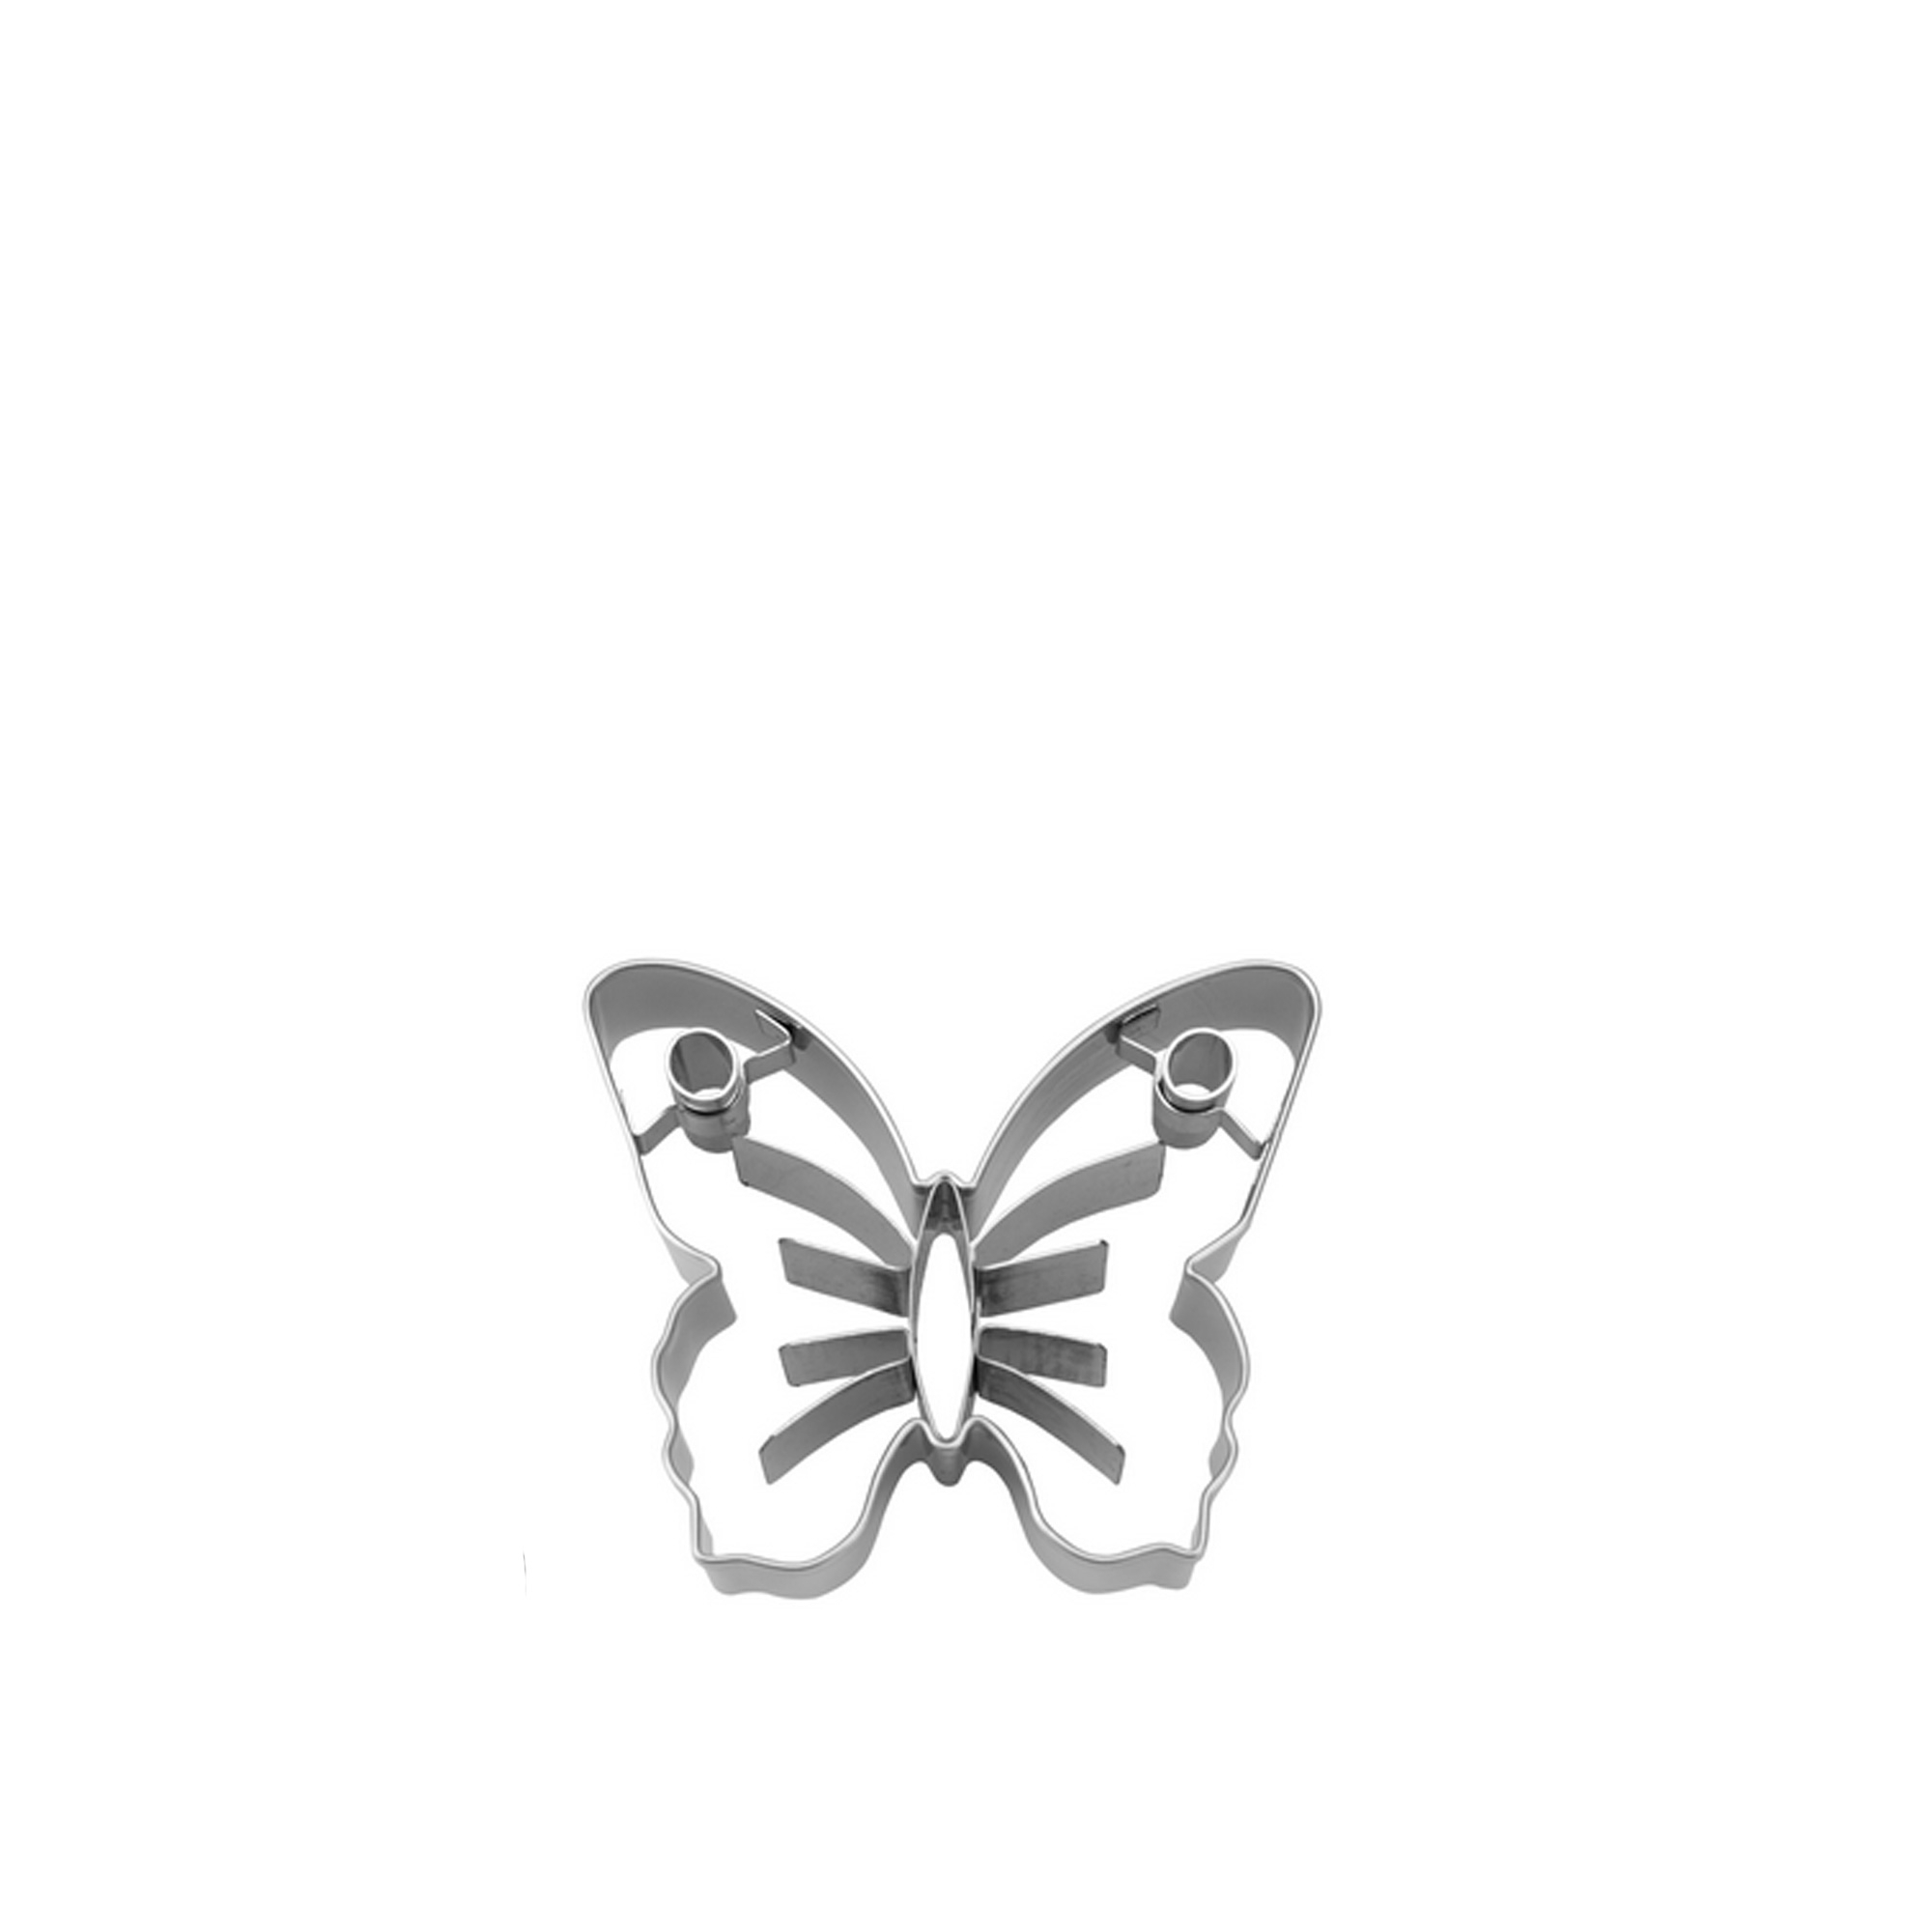 Städter - Cookie Cutter Butterfly Stainless Steel 7cm